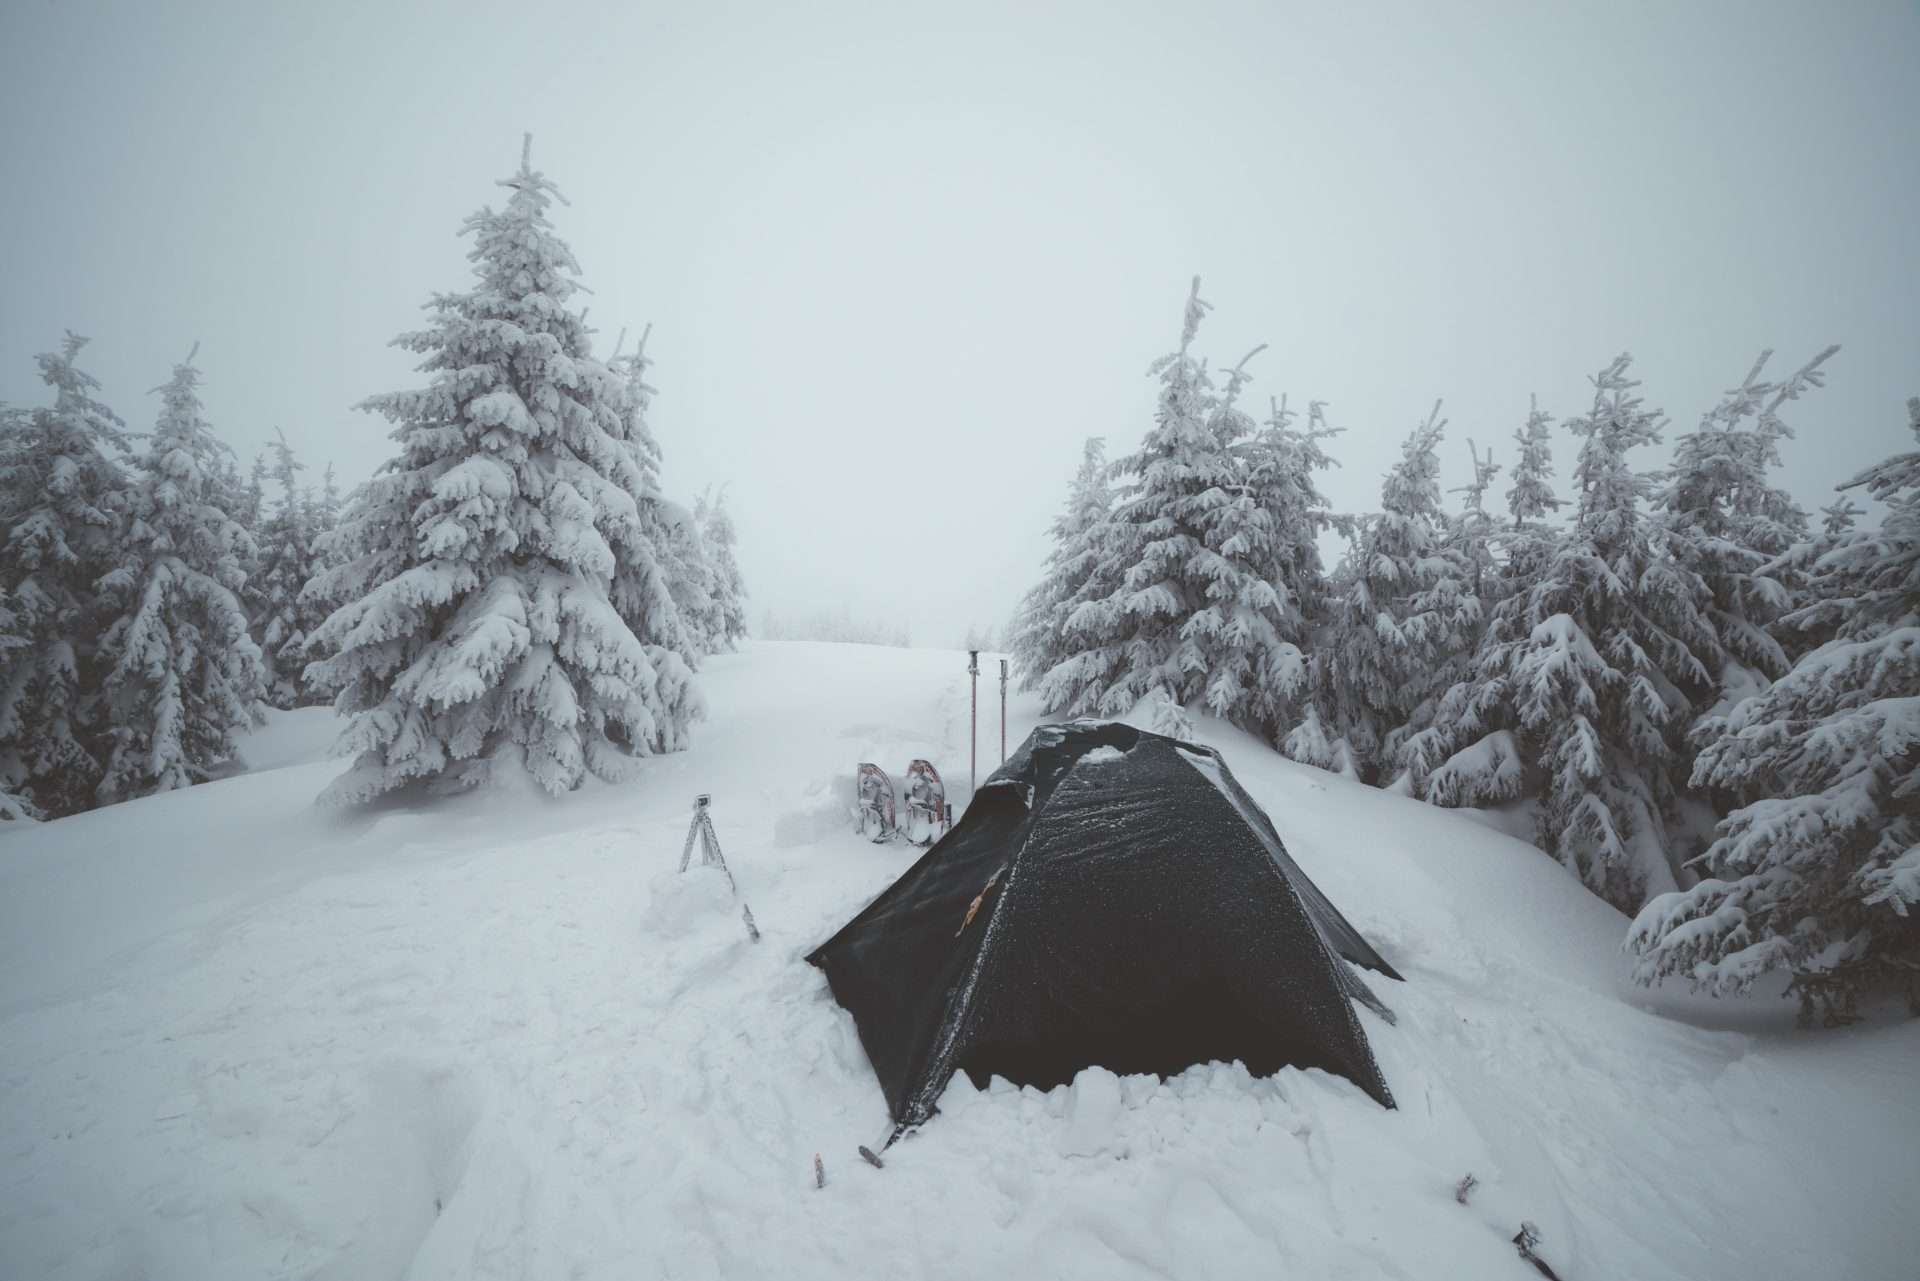 Tent surrounded in snow